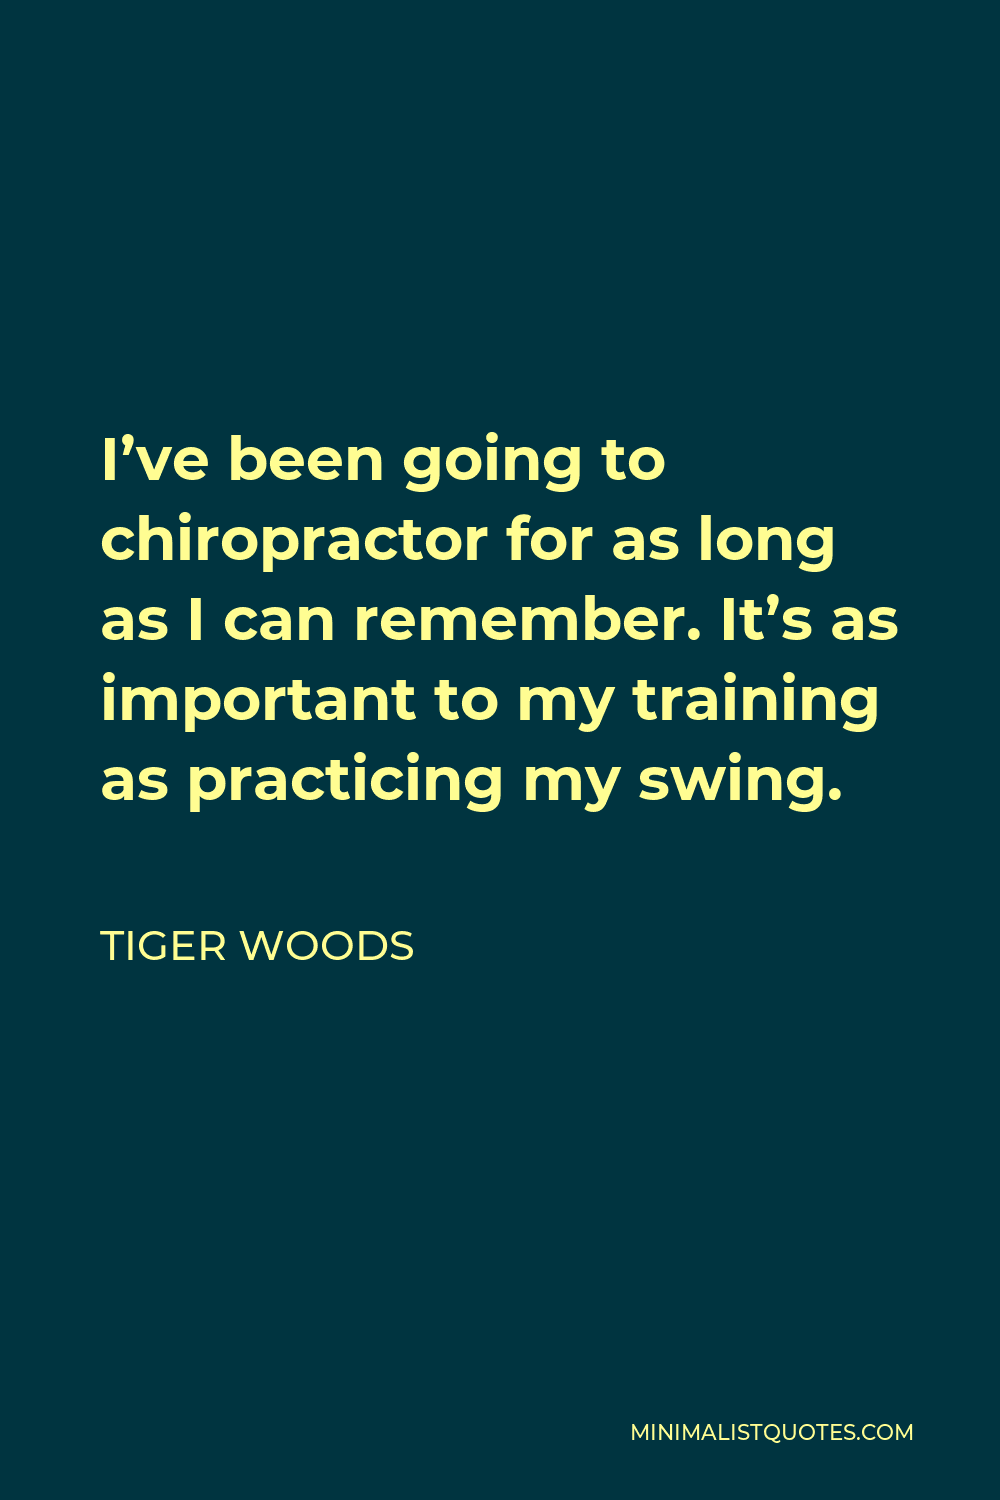 Tiger Woods Quote - I’ve been going to chiropractor for as long as I can remember. It’s as important to my training as practicing my swing.